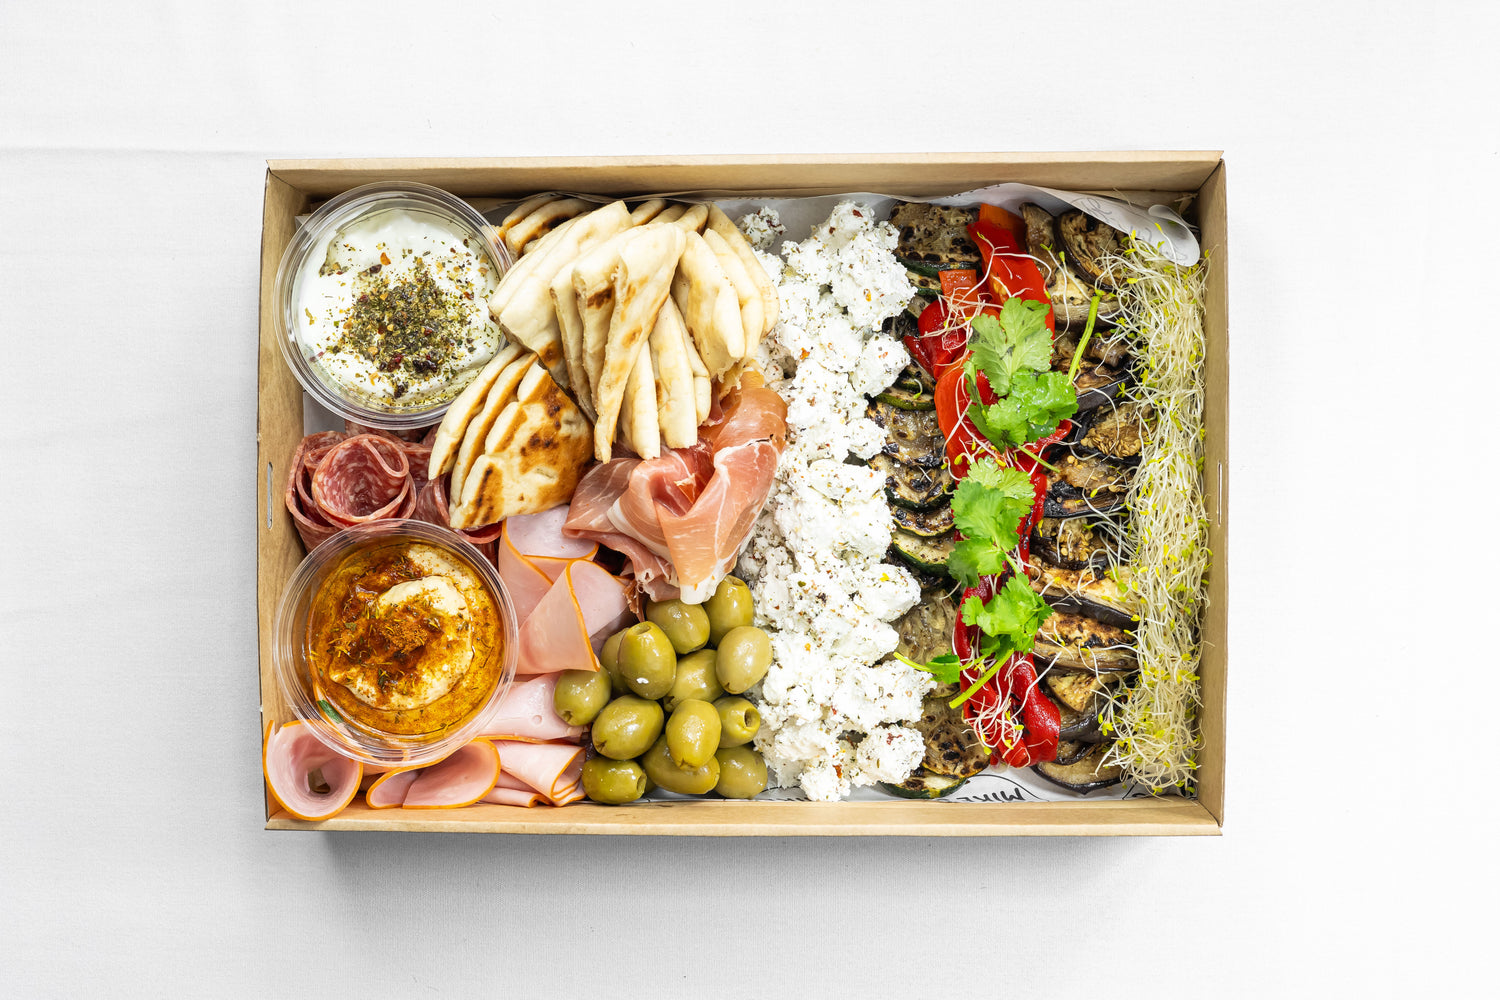 GRAZING AND SHARING PLATTERS